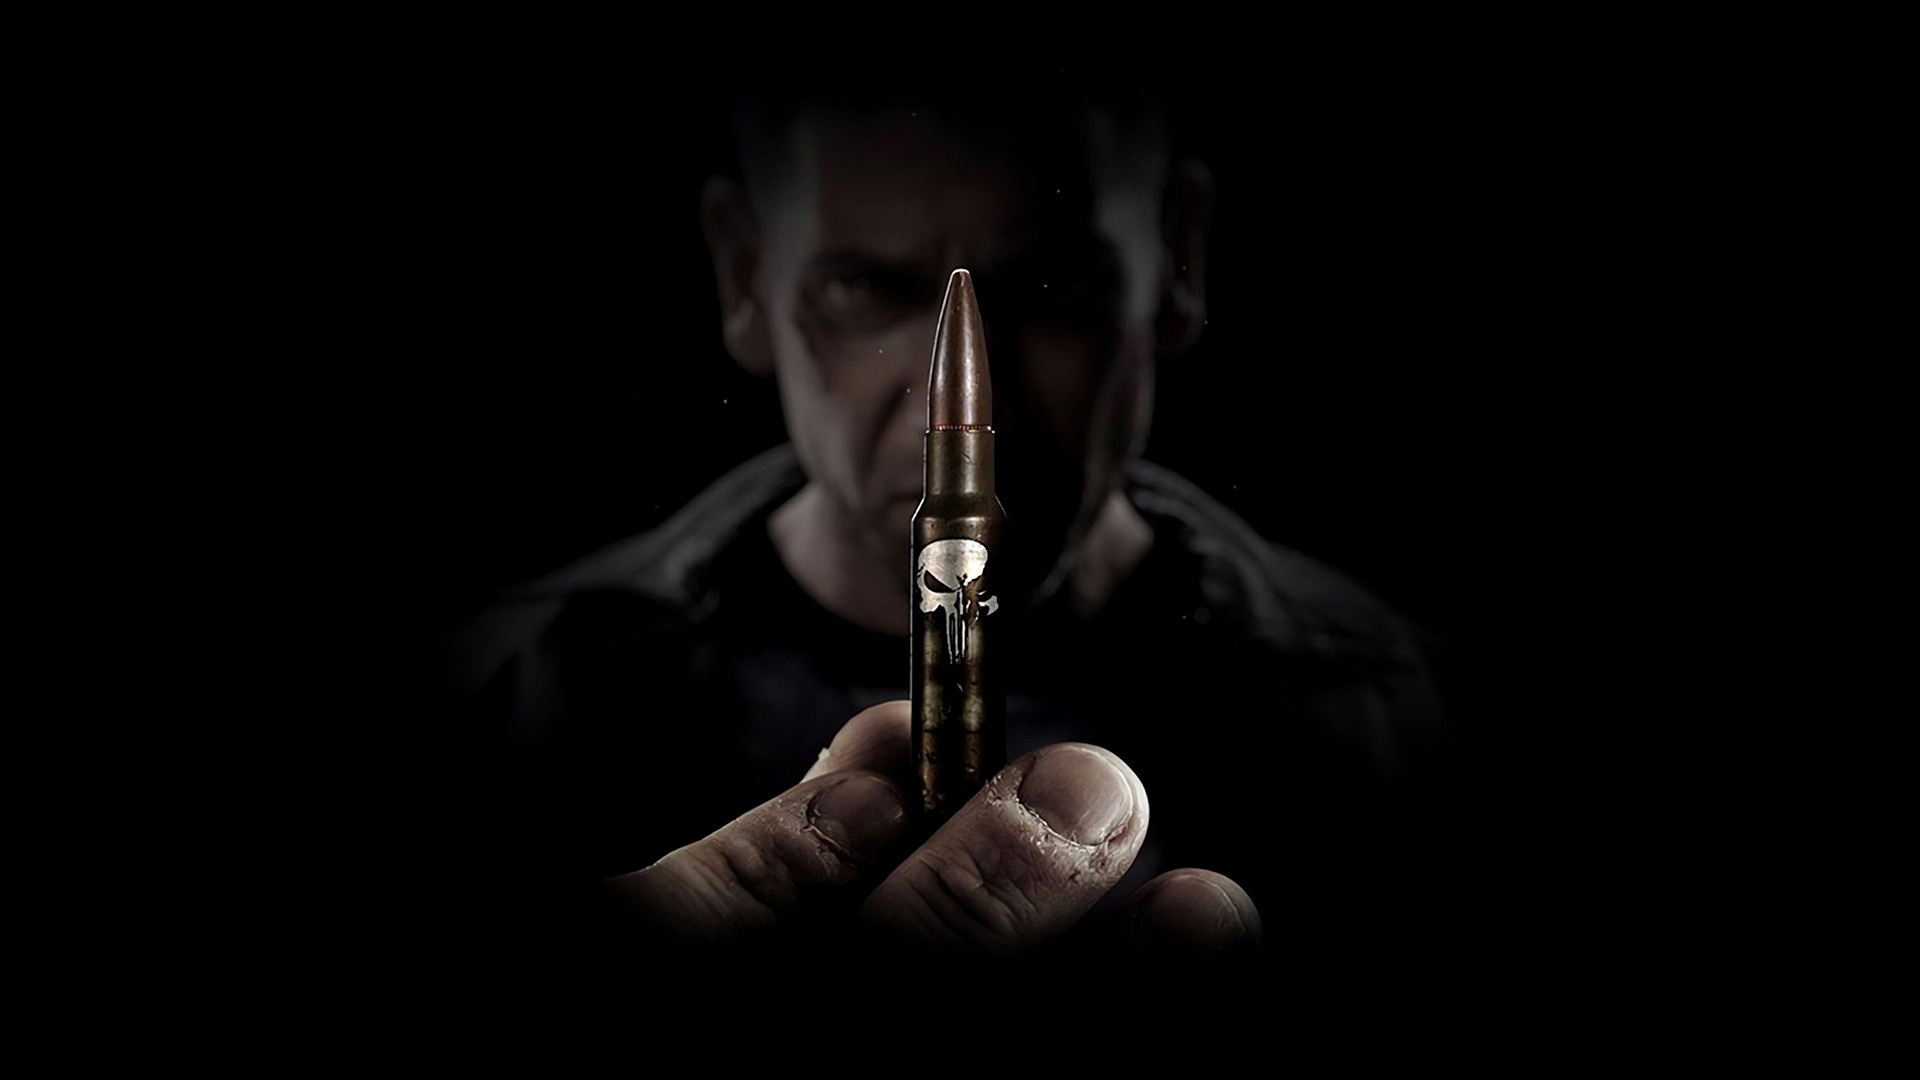 Free download 76 The Punisher Wallpaper [1920x1080] for your Desktop, Mobile & Tablet. Explore Marvel's The Punisher Wallpaper. Marvel's The Punisher Wallpaper, The Punisher Wallpaper, The Punisher Wallpaper